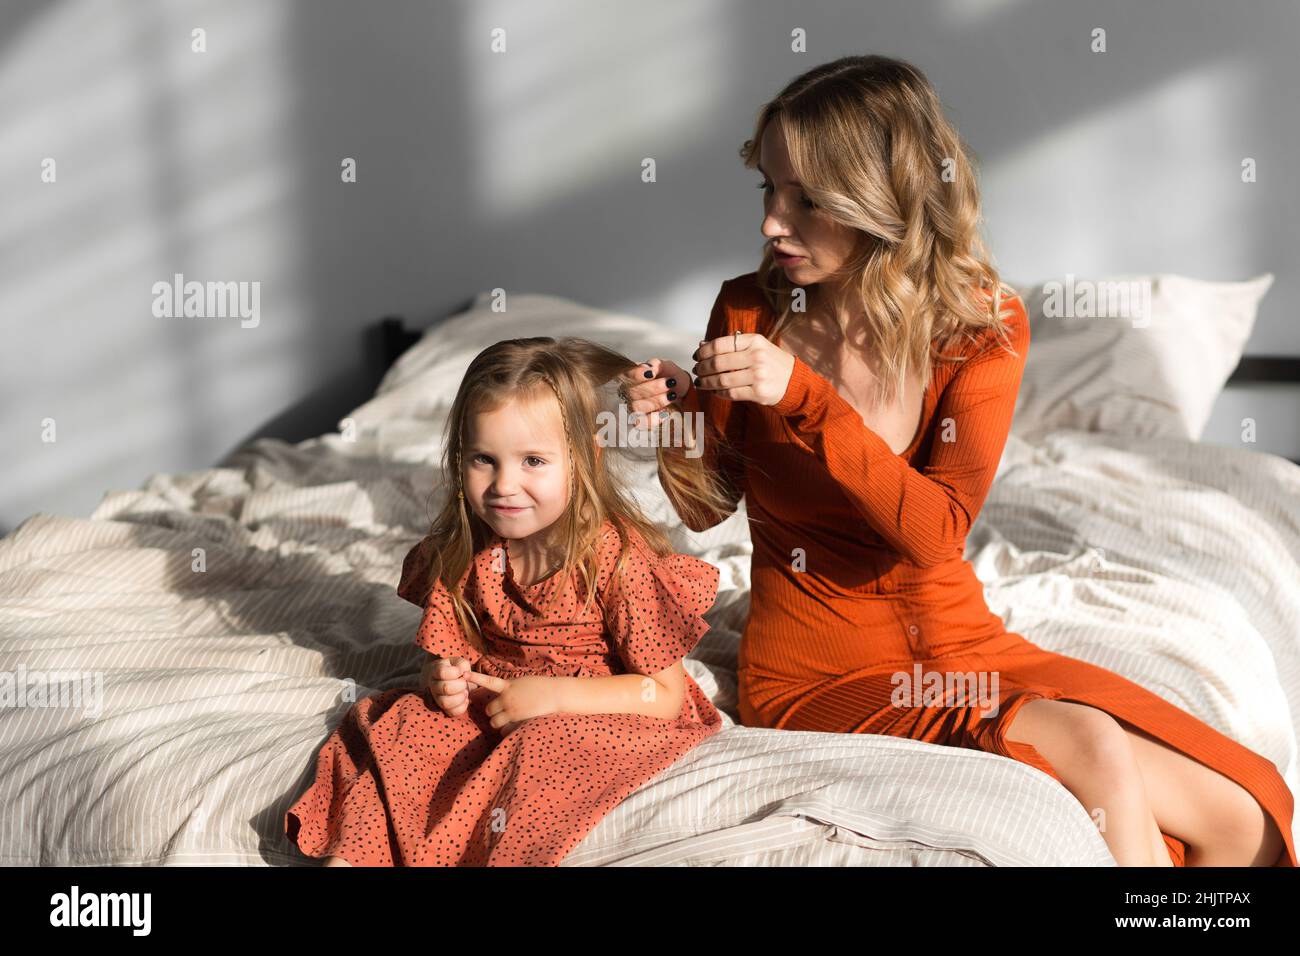 Mother combing her daughter's hair in bed Stock Photo